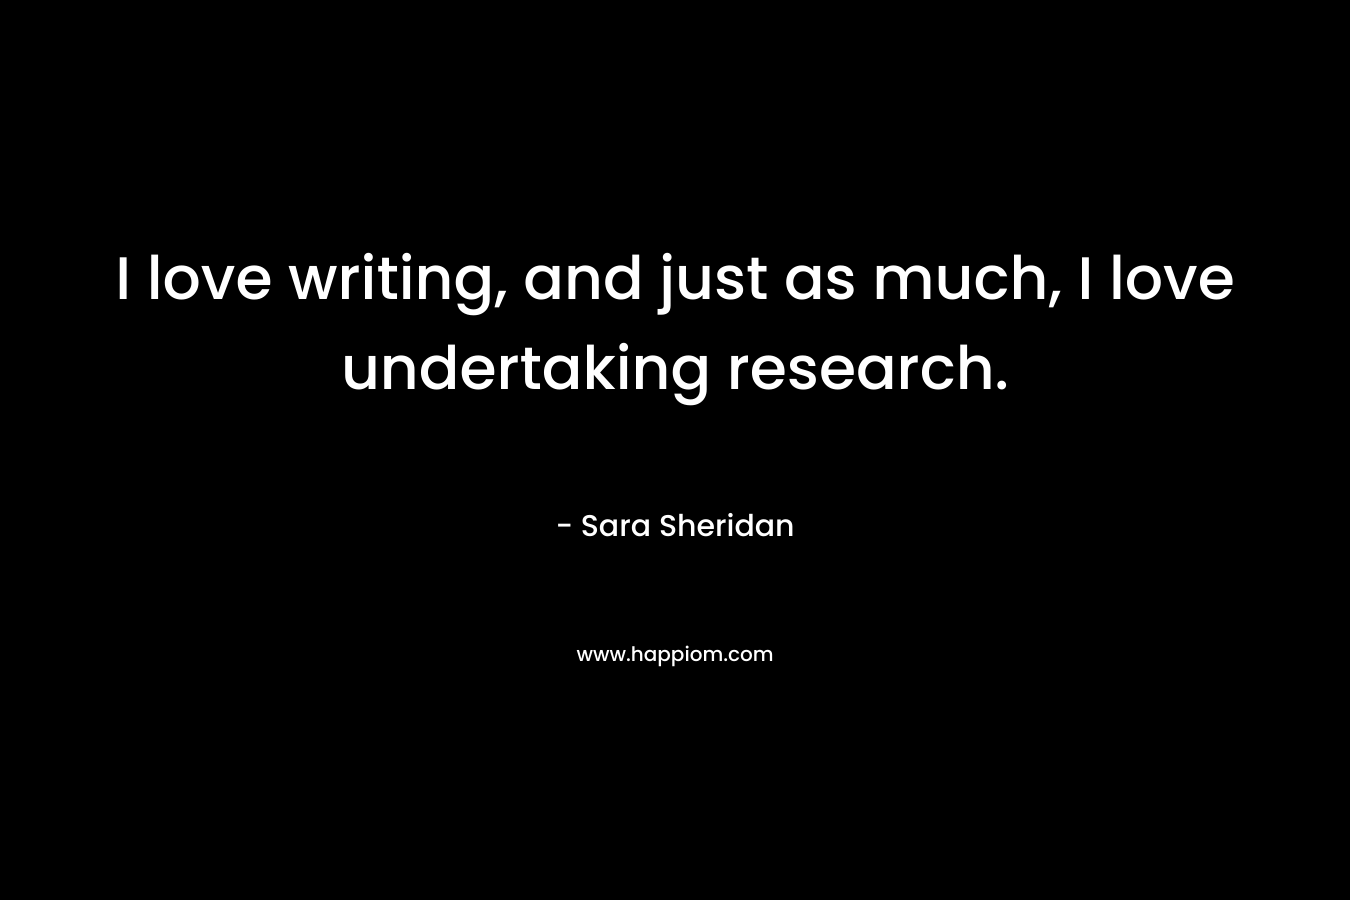 I love writing, and just as much, I love undertaking research. – Sara Sheridan